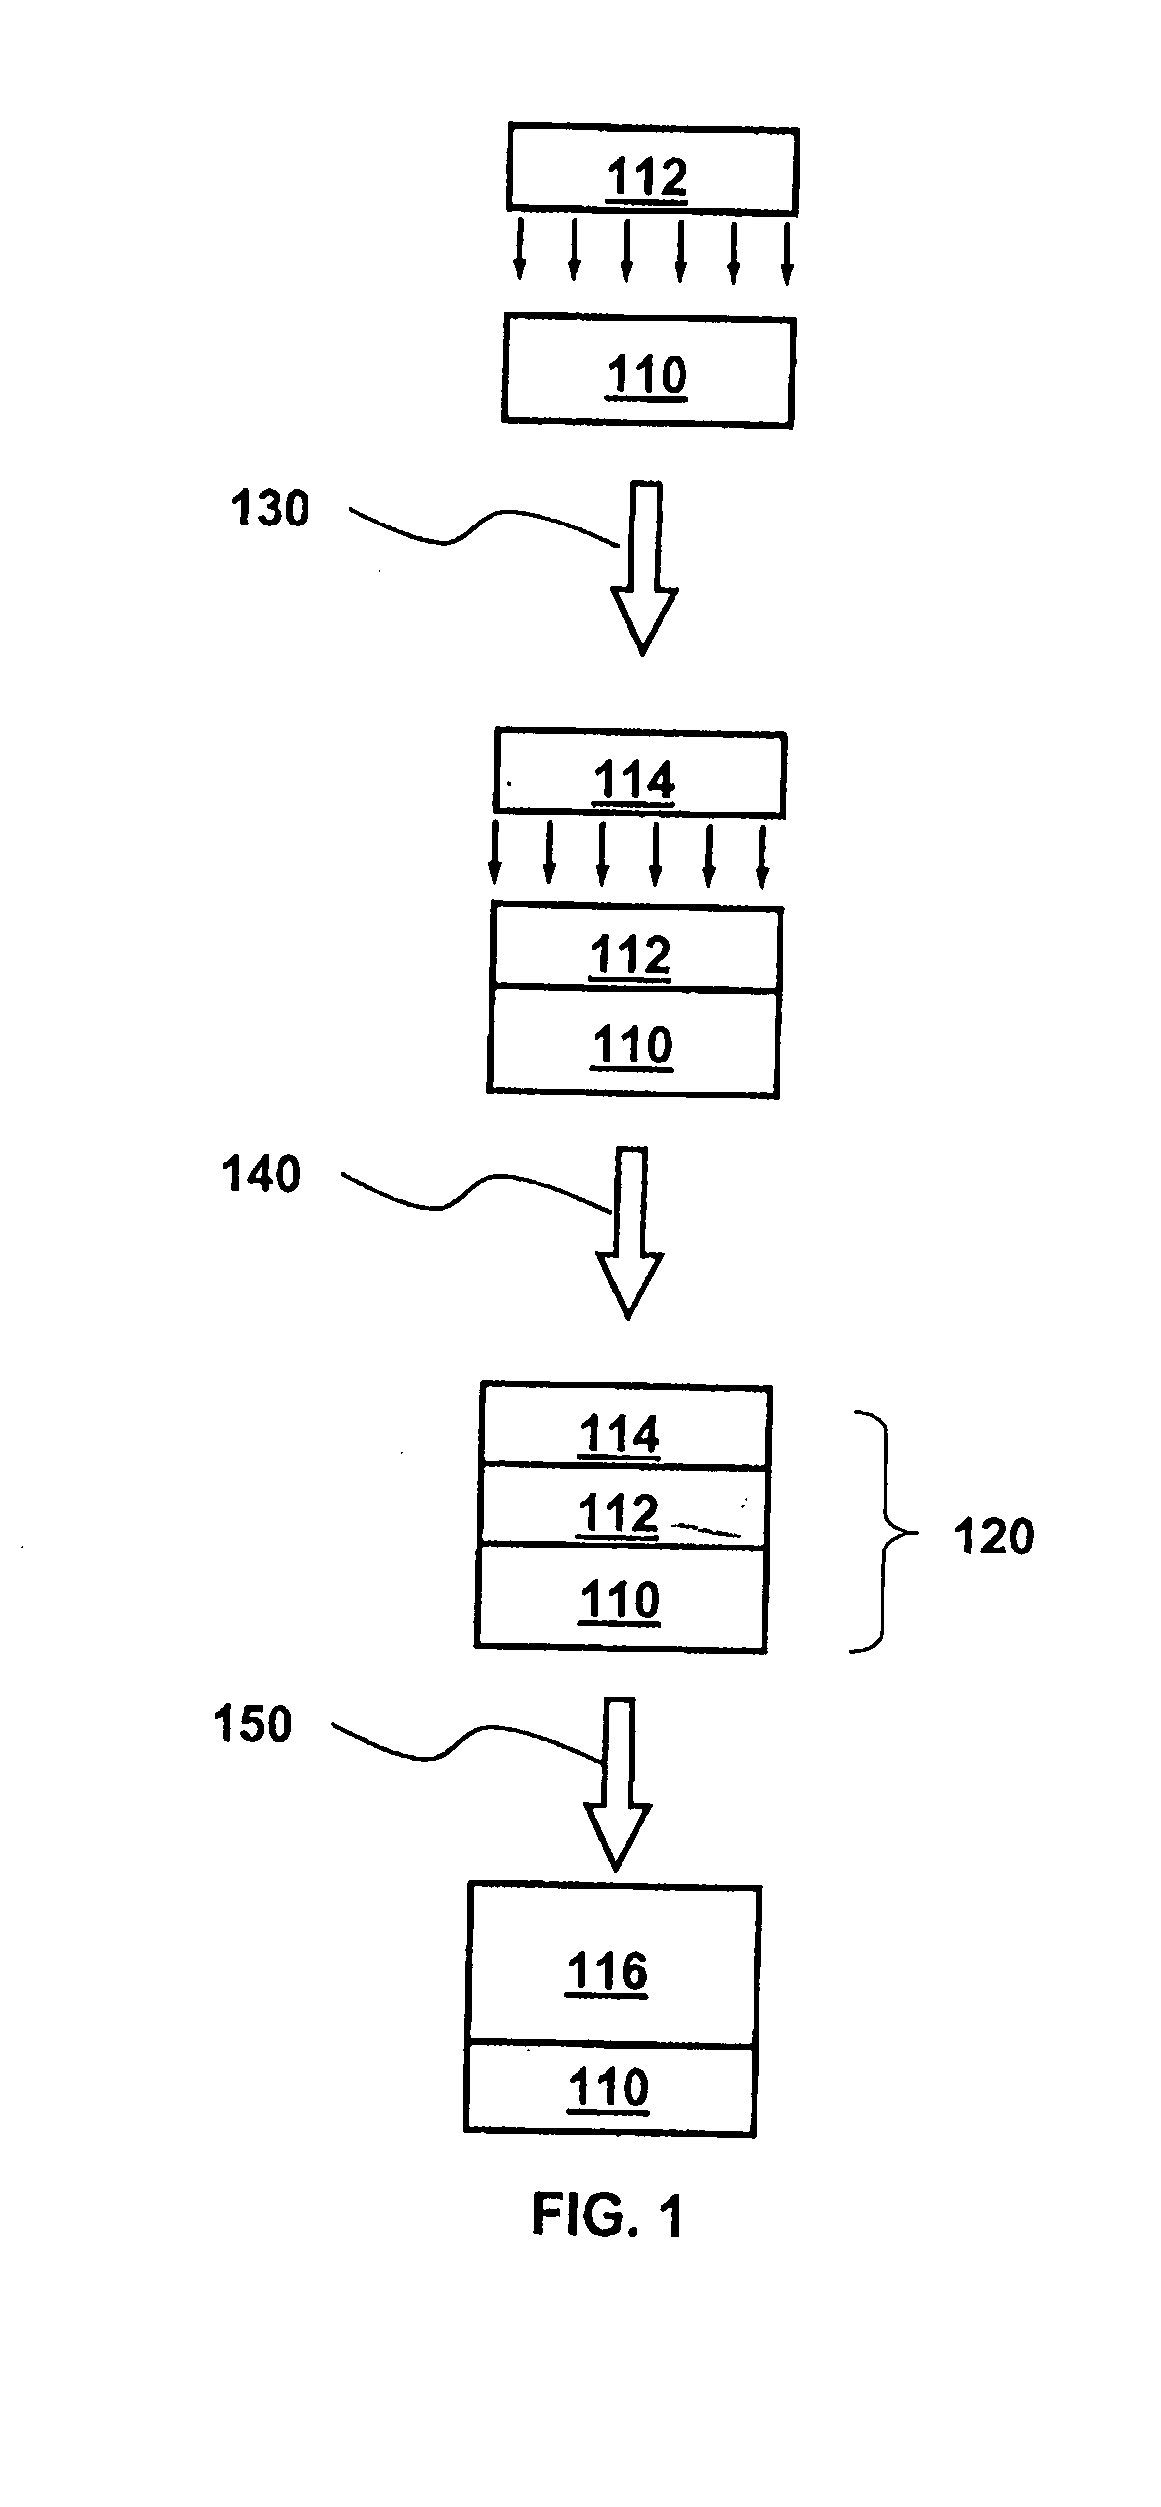 Contact structure for semiconductor devices